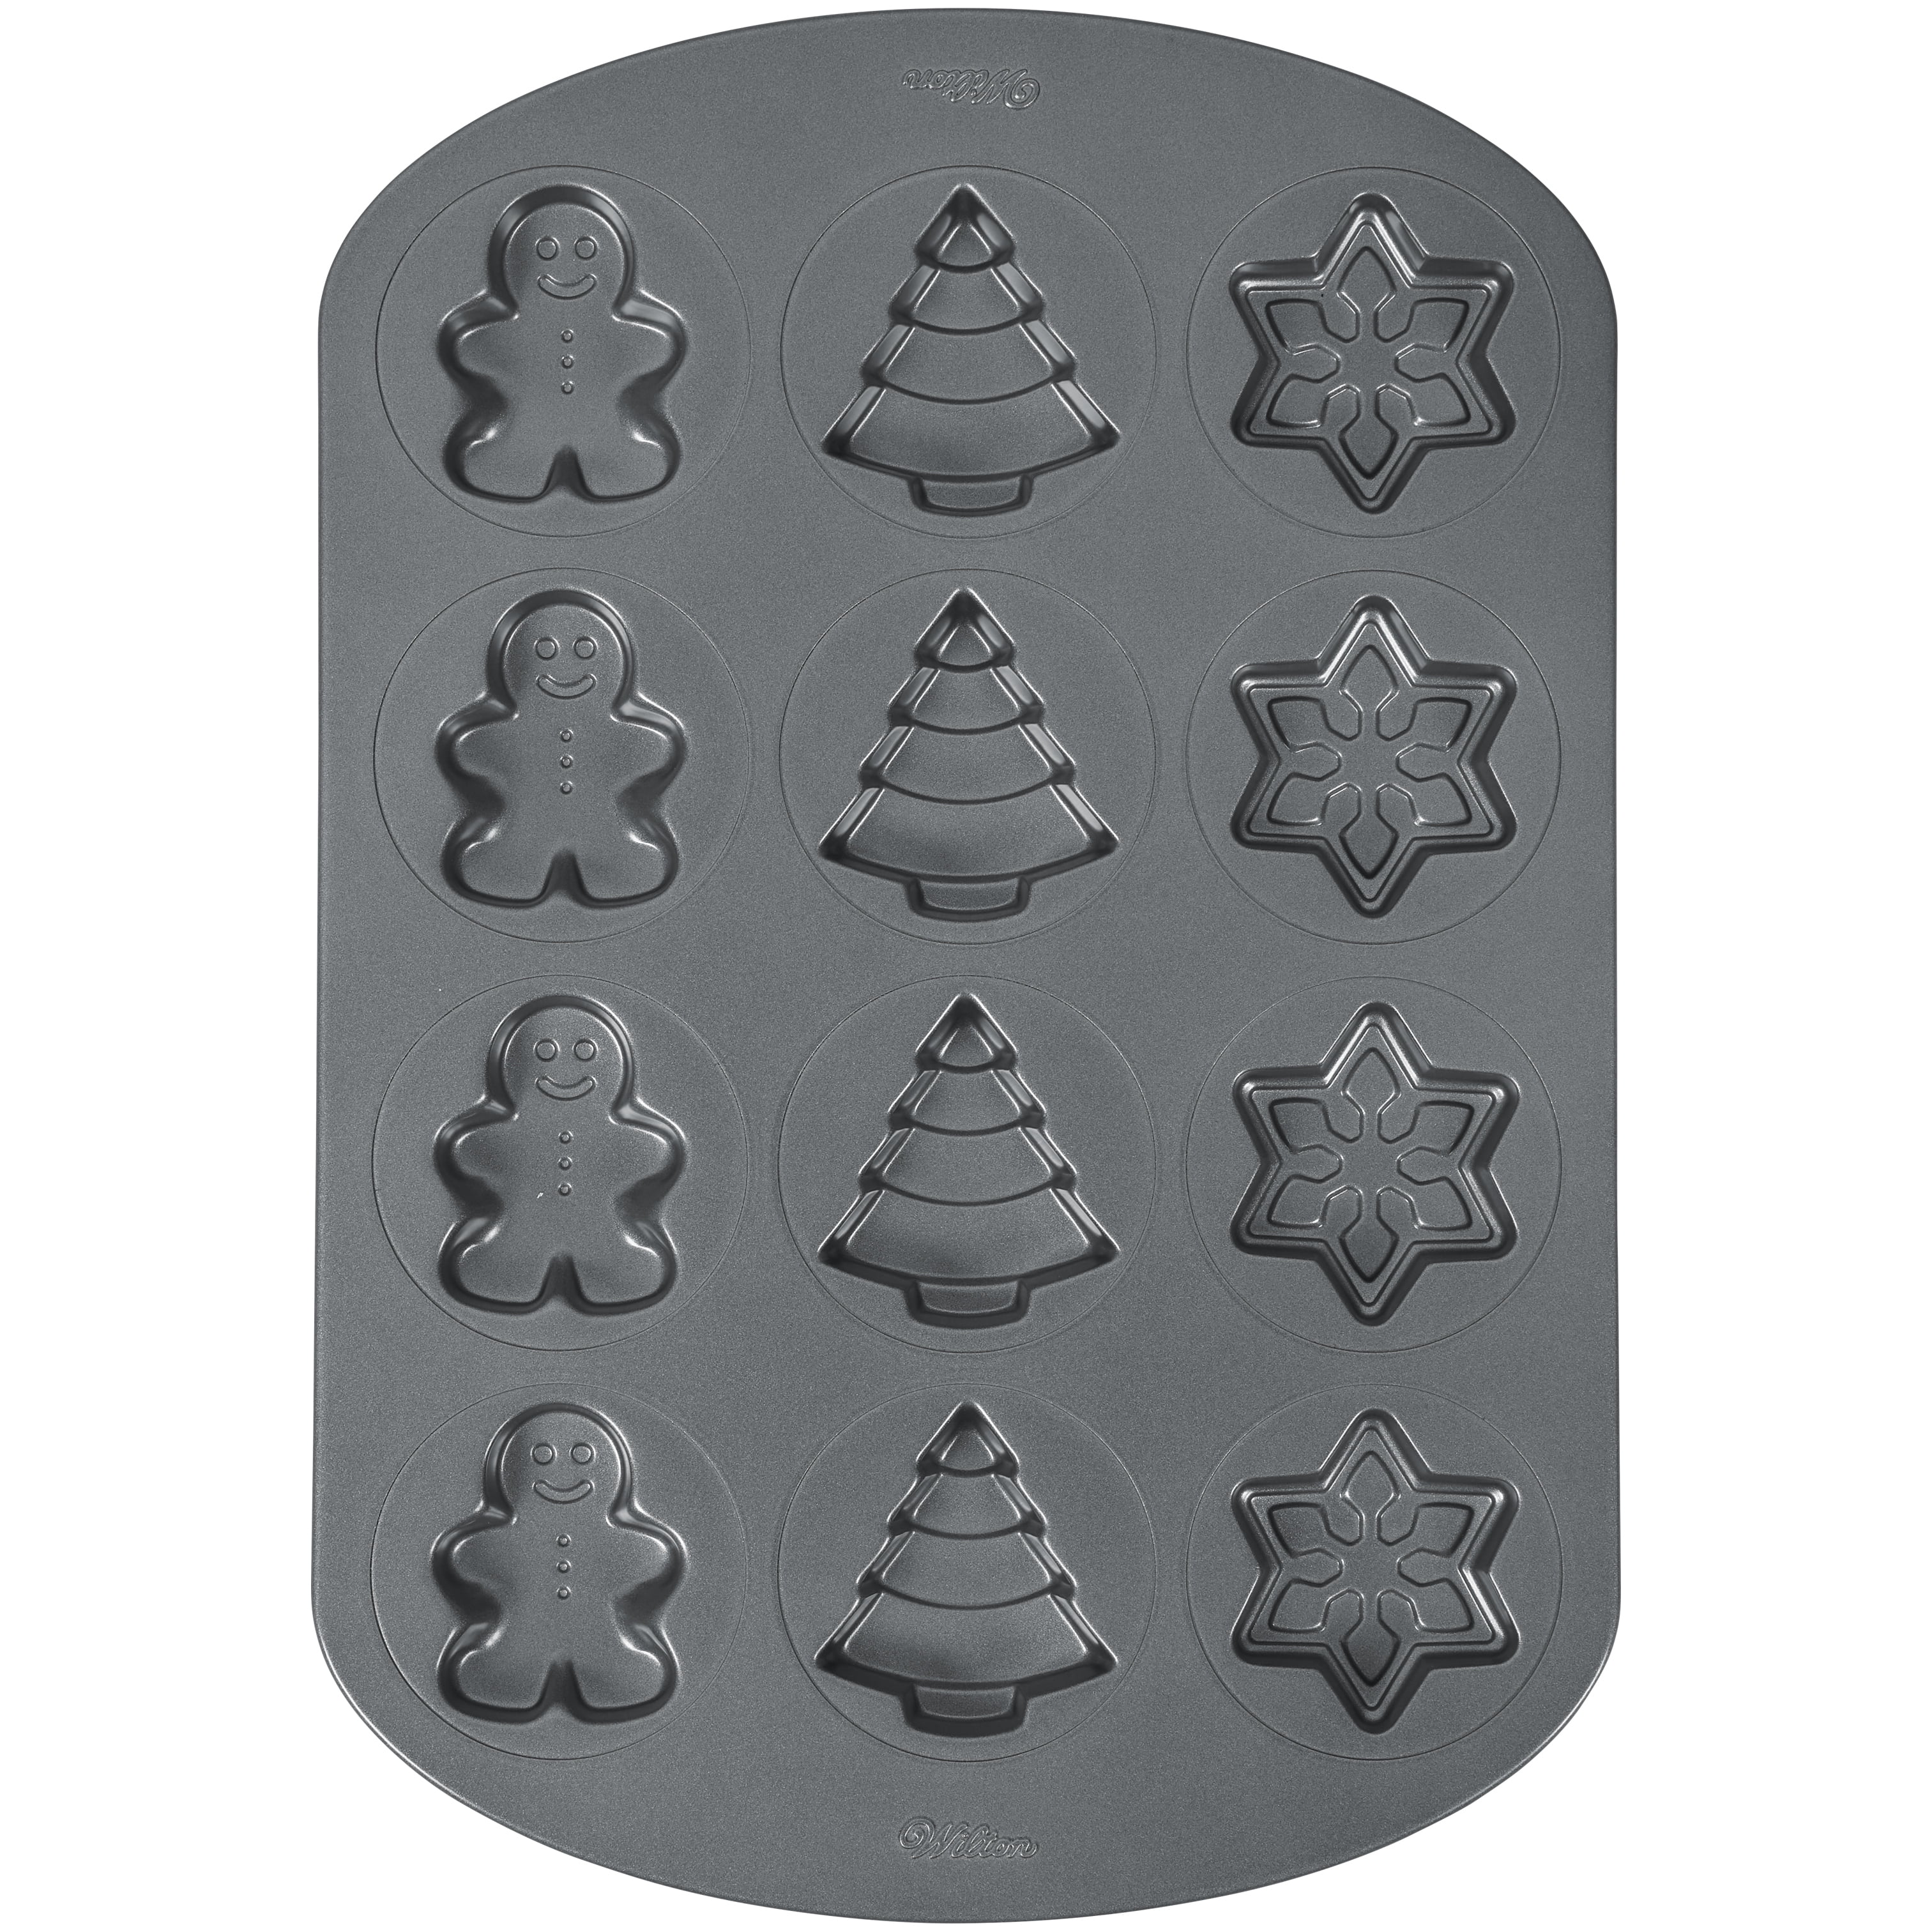  Wilton Holiday Shapes Non-Stick Cookie Pan, 12-Cavity: Home &  Kitchen